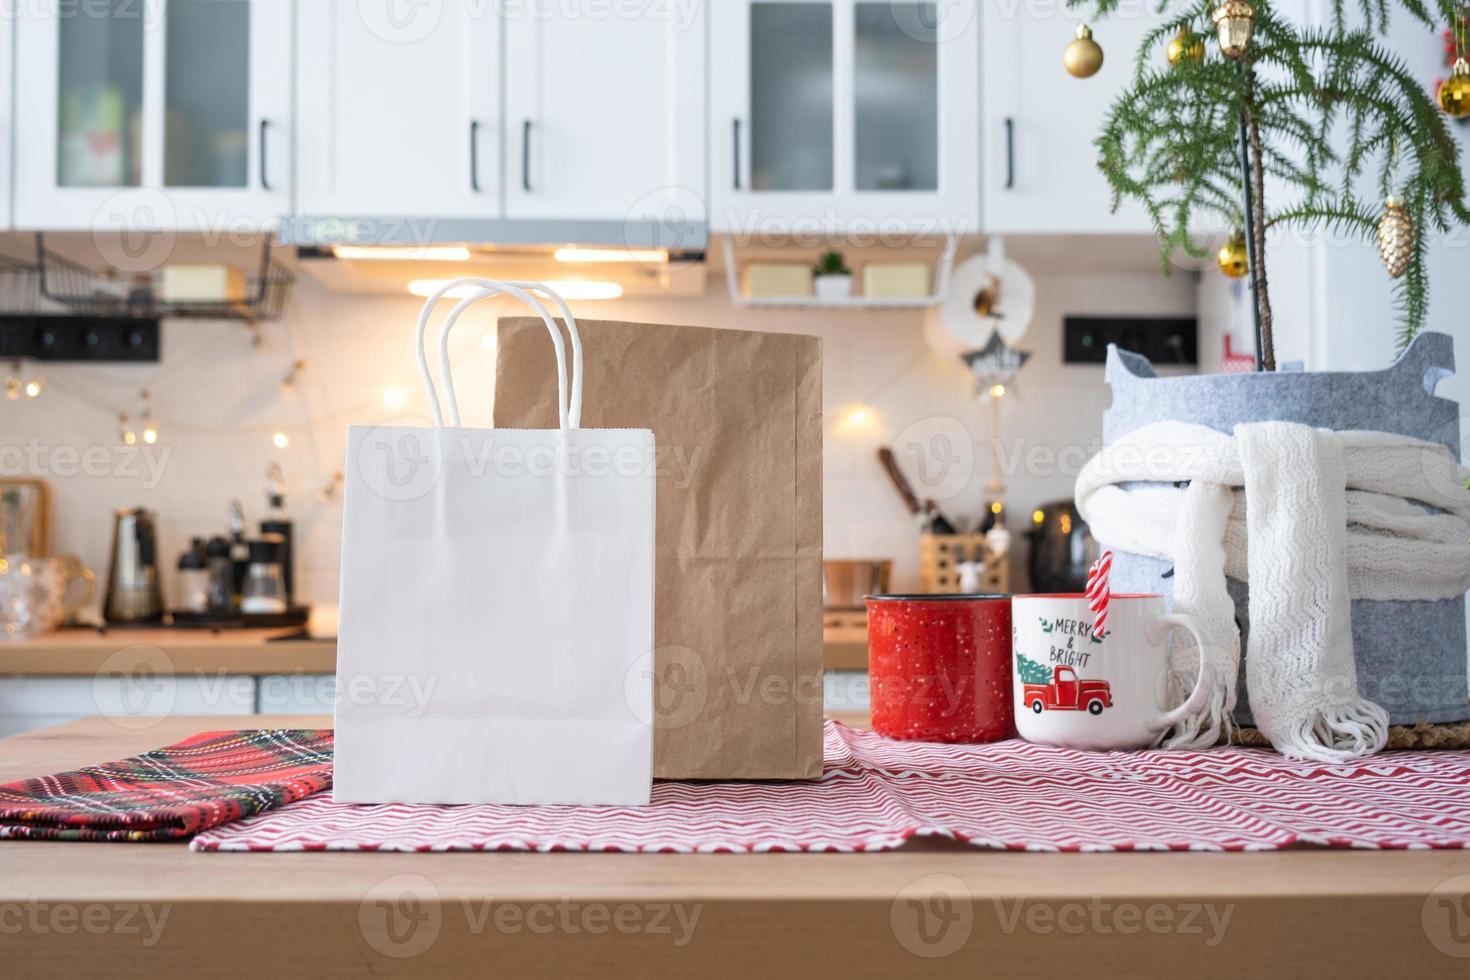 Food delivery service containers on table white scandi festive kitchen in christmas decor. Eve New year, saving time, too lazy to cook, hot order, disposable plastic box in fairy light. mock up photo